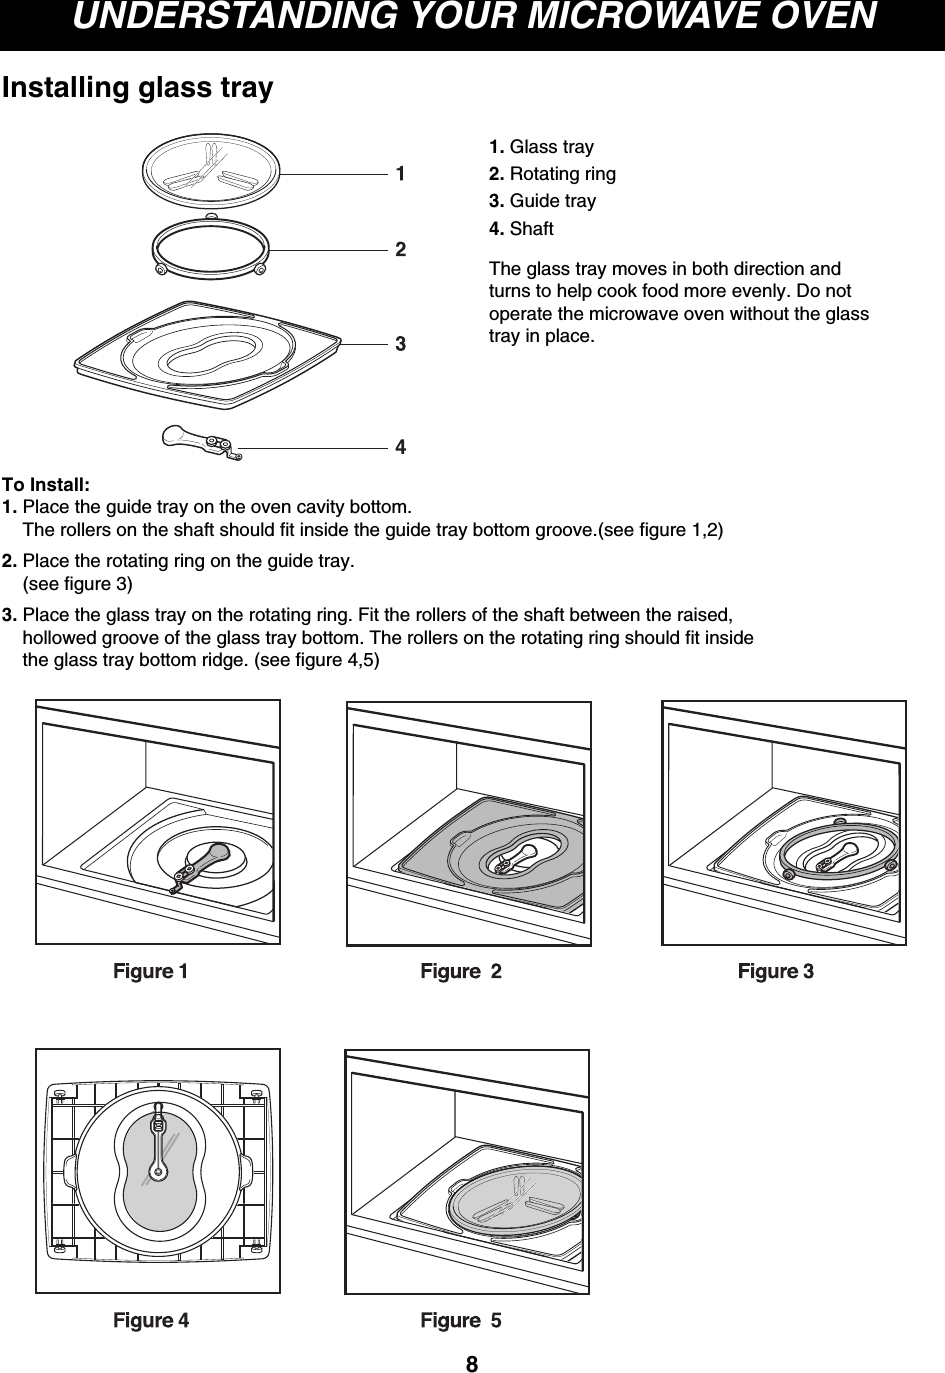 UNDERSTANDING YOUR MICROWAVE OVEN1. Glass tray2. Rotating ring3. Guide tray4. ShaftThe glass tray moves in both direction andturns to help cook food more evenly. Do notoperate the microwave oven without the glasstray in place.To Install:1. Place the guide tray on the oven cavity bottom.The rollers on the shaft should fit inside the guide tray bottom groove.(see figure 1,2)2. Place the rotating ring on the guide tray.(see figure 3)3. Place the glass tray on the rotating ring. Fit the rollers of the shaft between the raised,hollowed groove of the glass tray bottom. The rollers on the rotating ring should fit insidethe glass tray bottom ridge. (see figure 4,5)8Installing glass tray